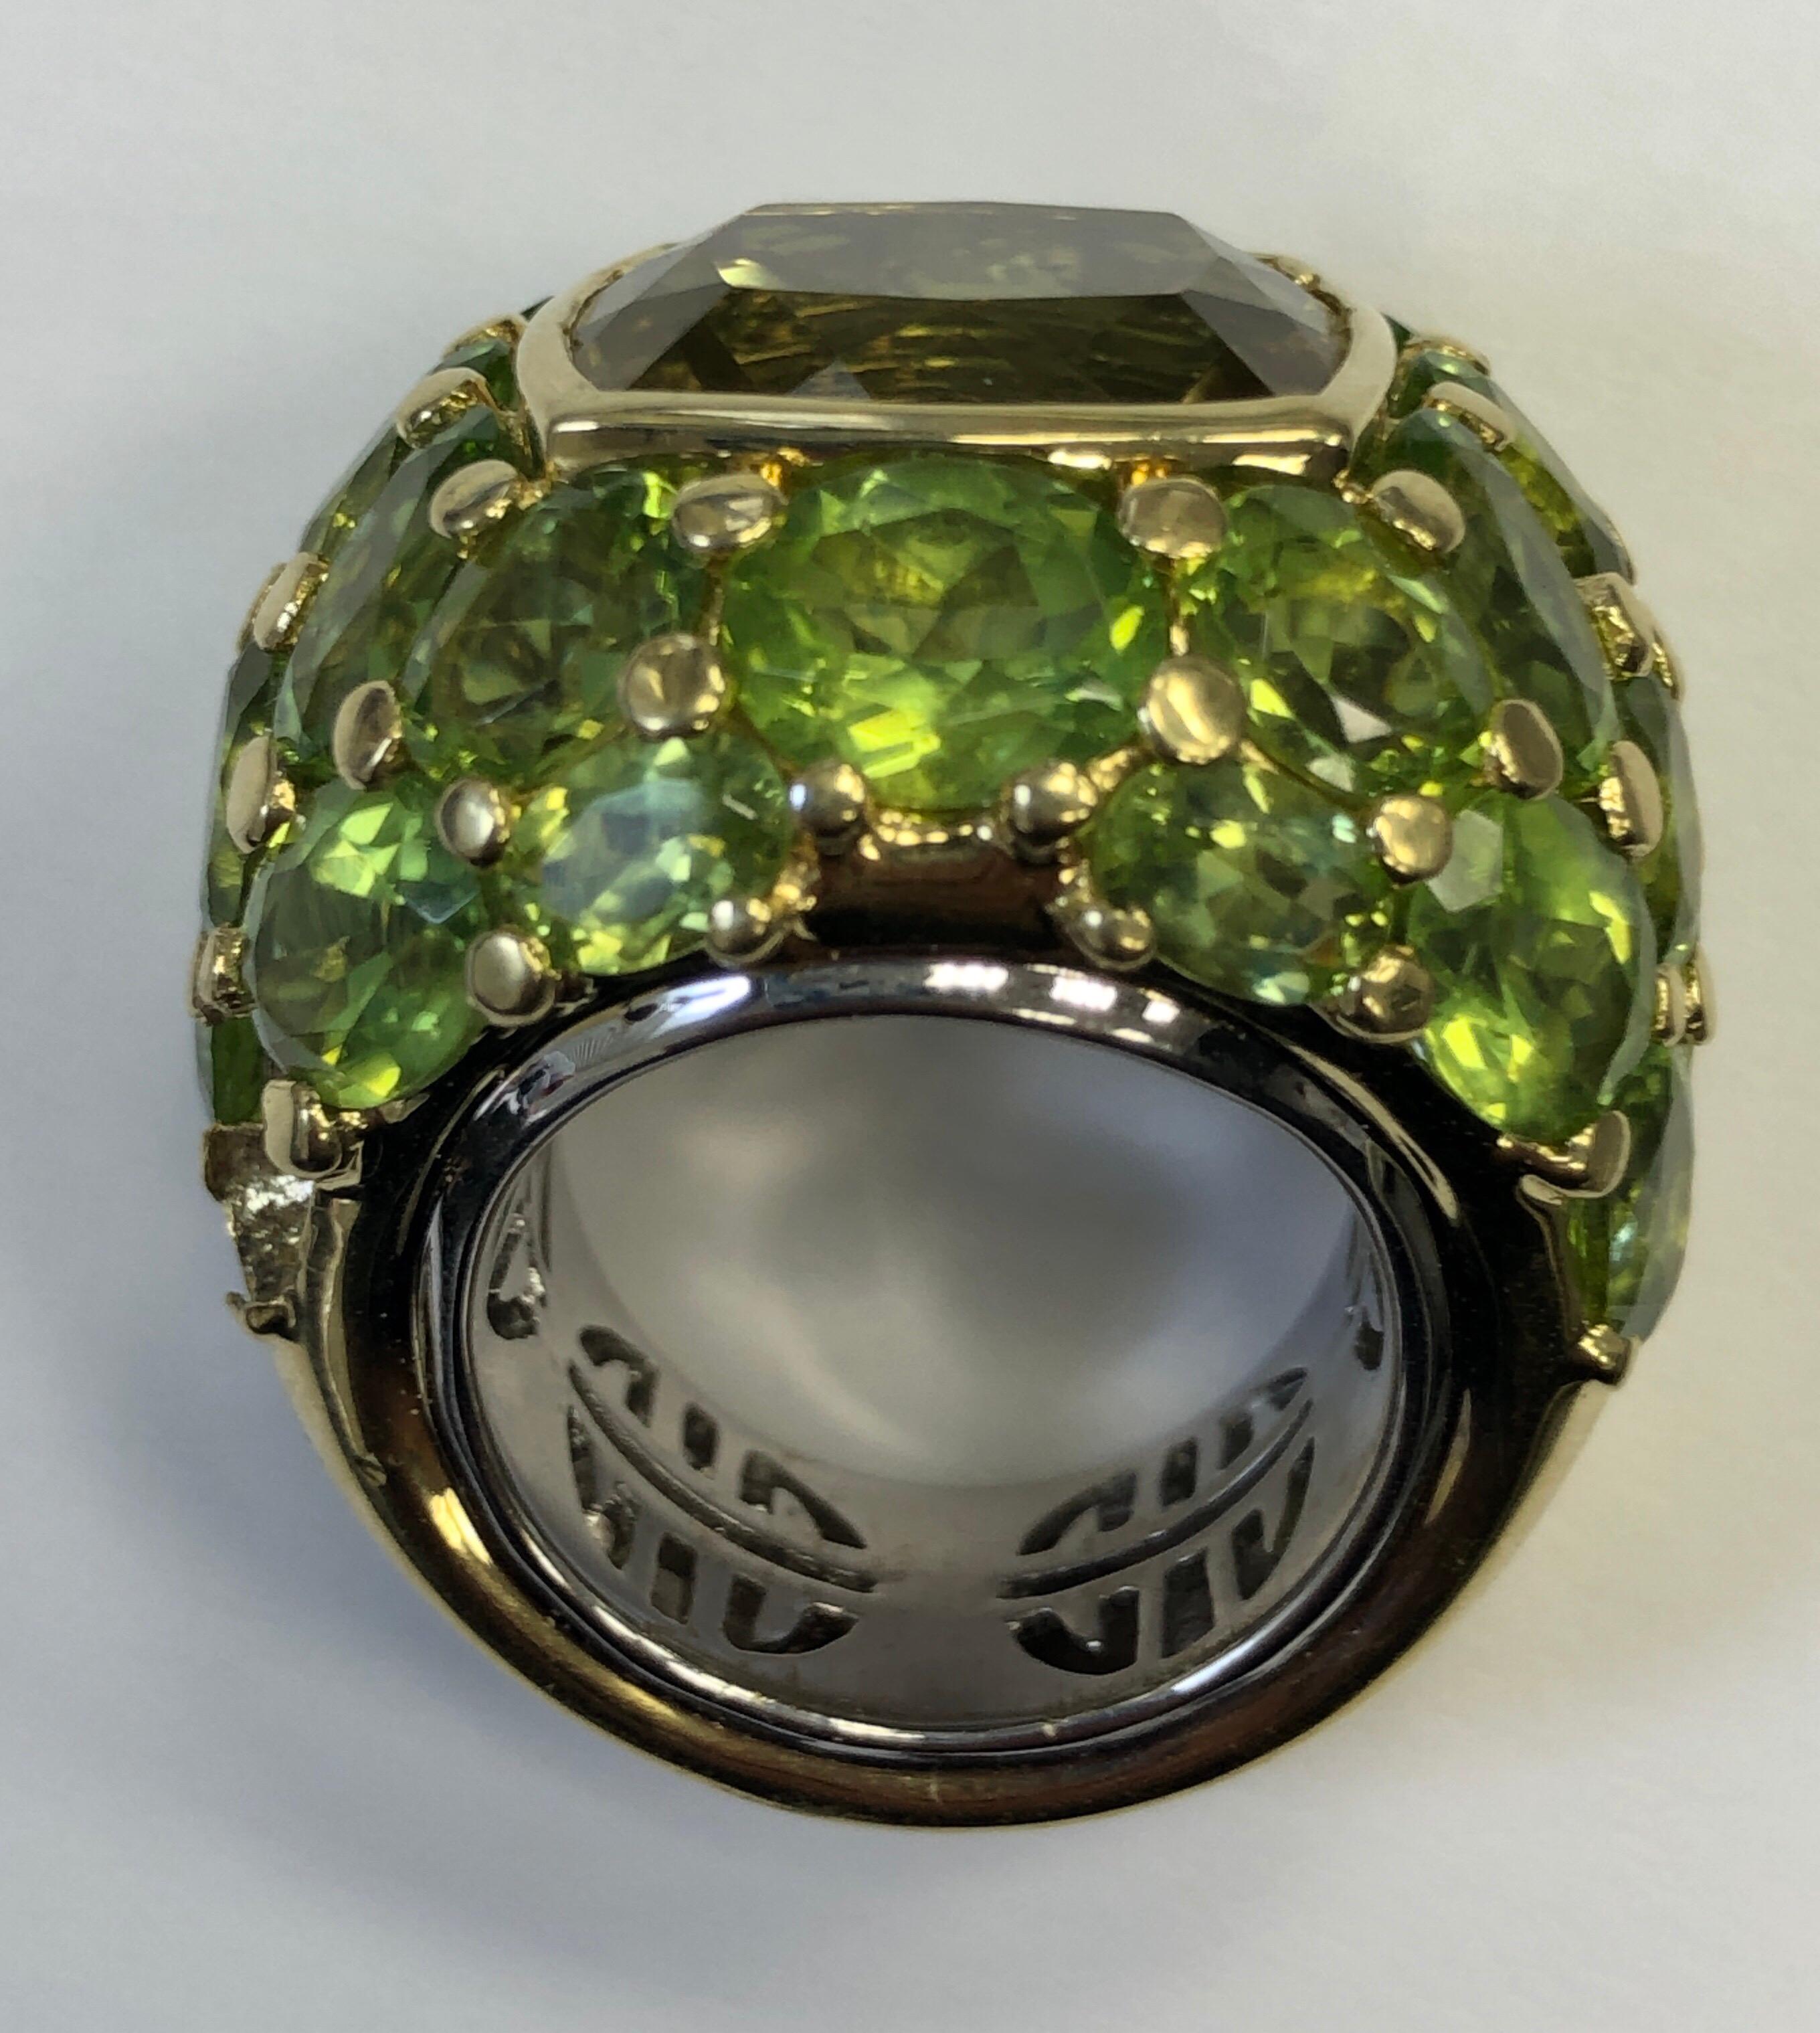 The ring, sized 7.75, is absolutely huge and fabulous. Centered on an approximately 16 carat lemon quartz and surrounded by approximately 32 carats of fine oval mixed cut peridot, and weighing a hefty 42.50 grams this is quite the cocktail ring. New